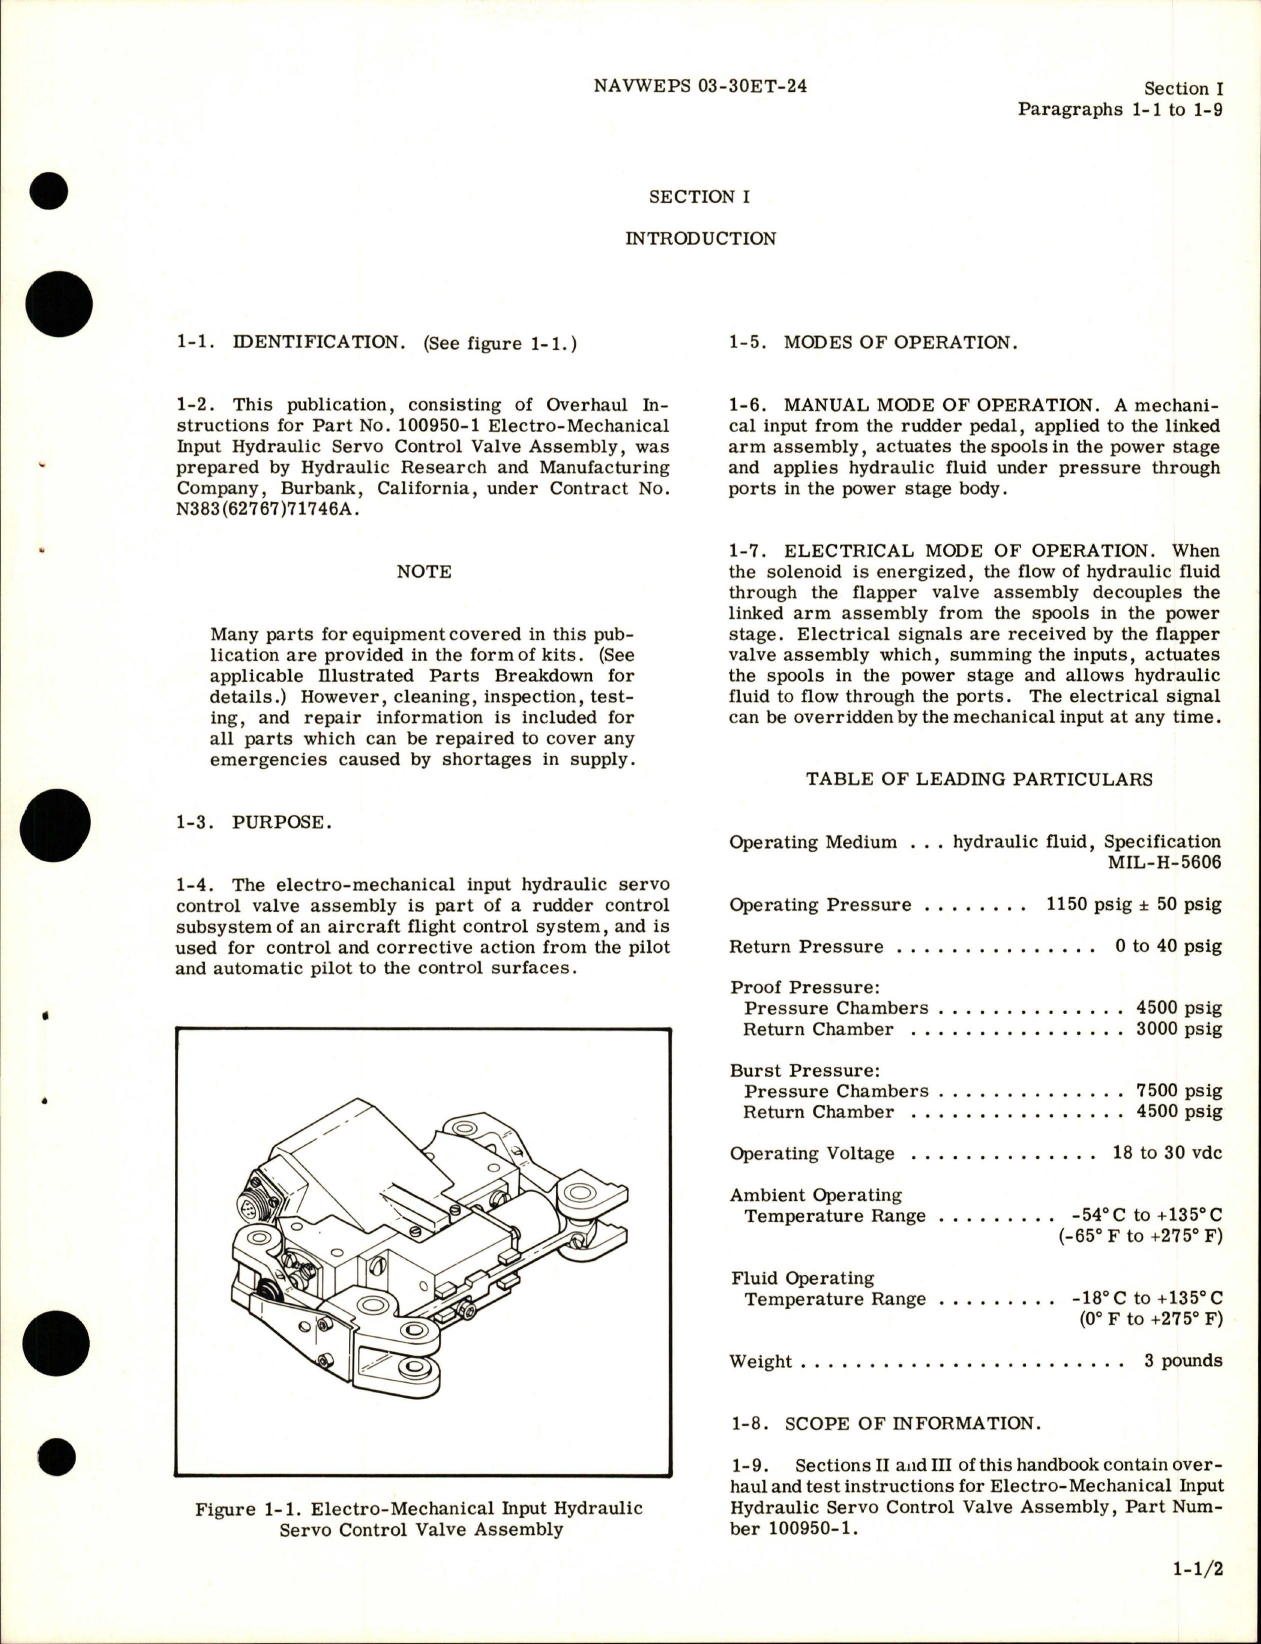 Sample page 5 from AirCorps Library document: Overhaul Instructions with Parts Breakdown for Motor Operated Shutoff Valve - Part AV16E1131B